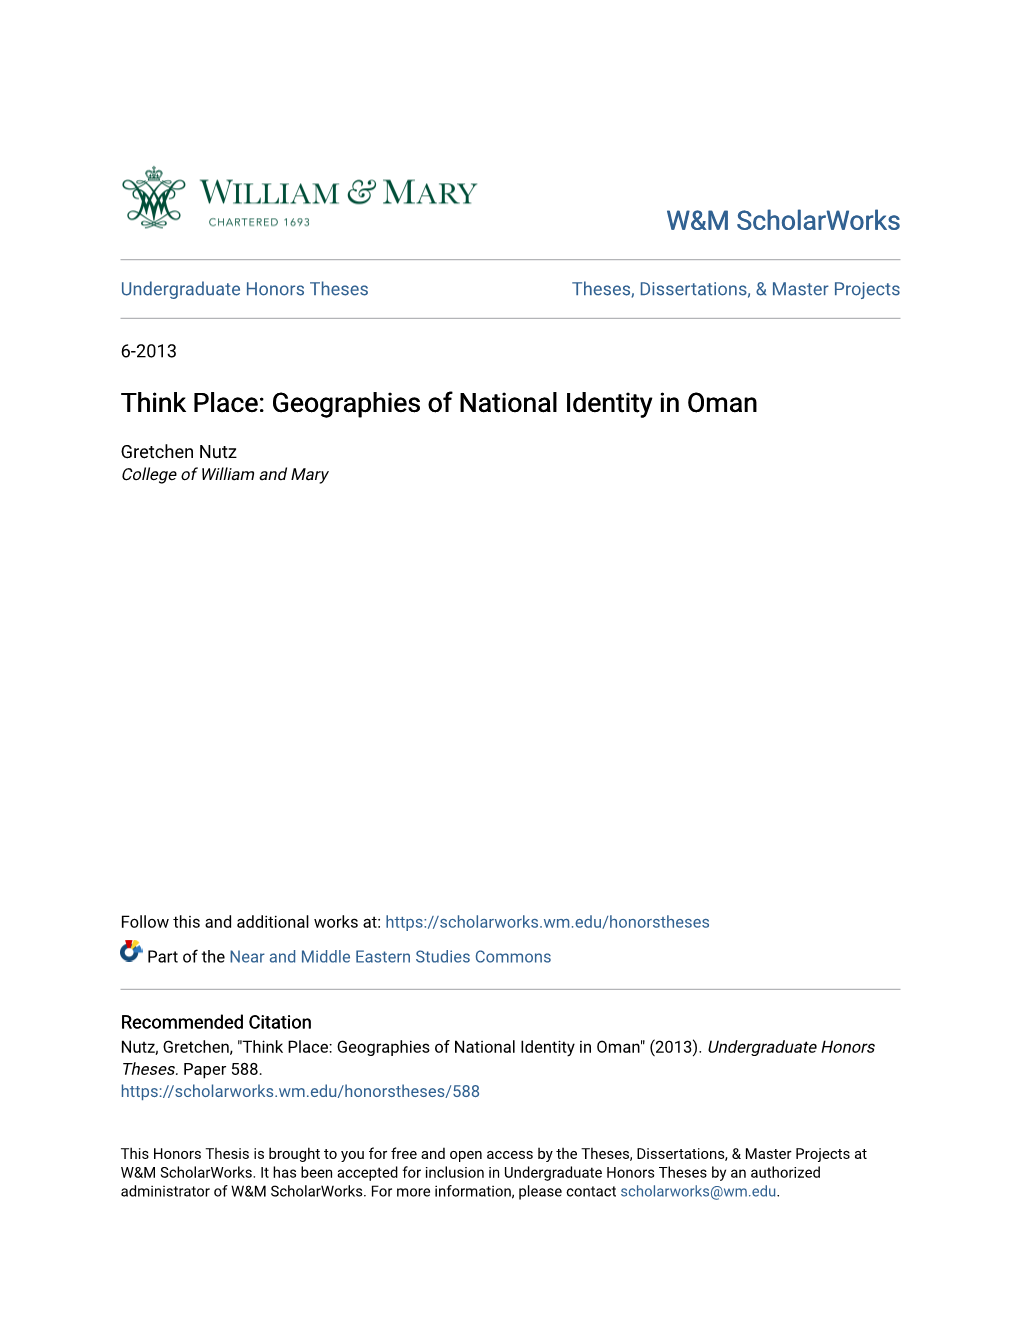 Think Place: Geographies of National Identity in Oman